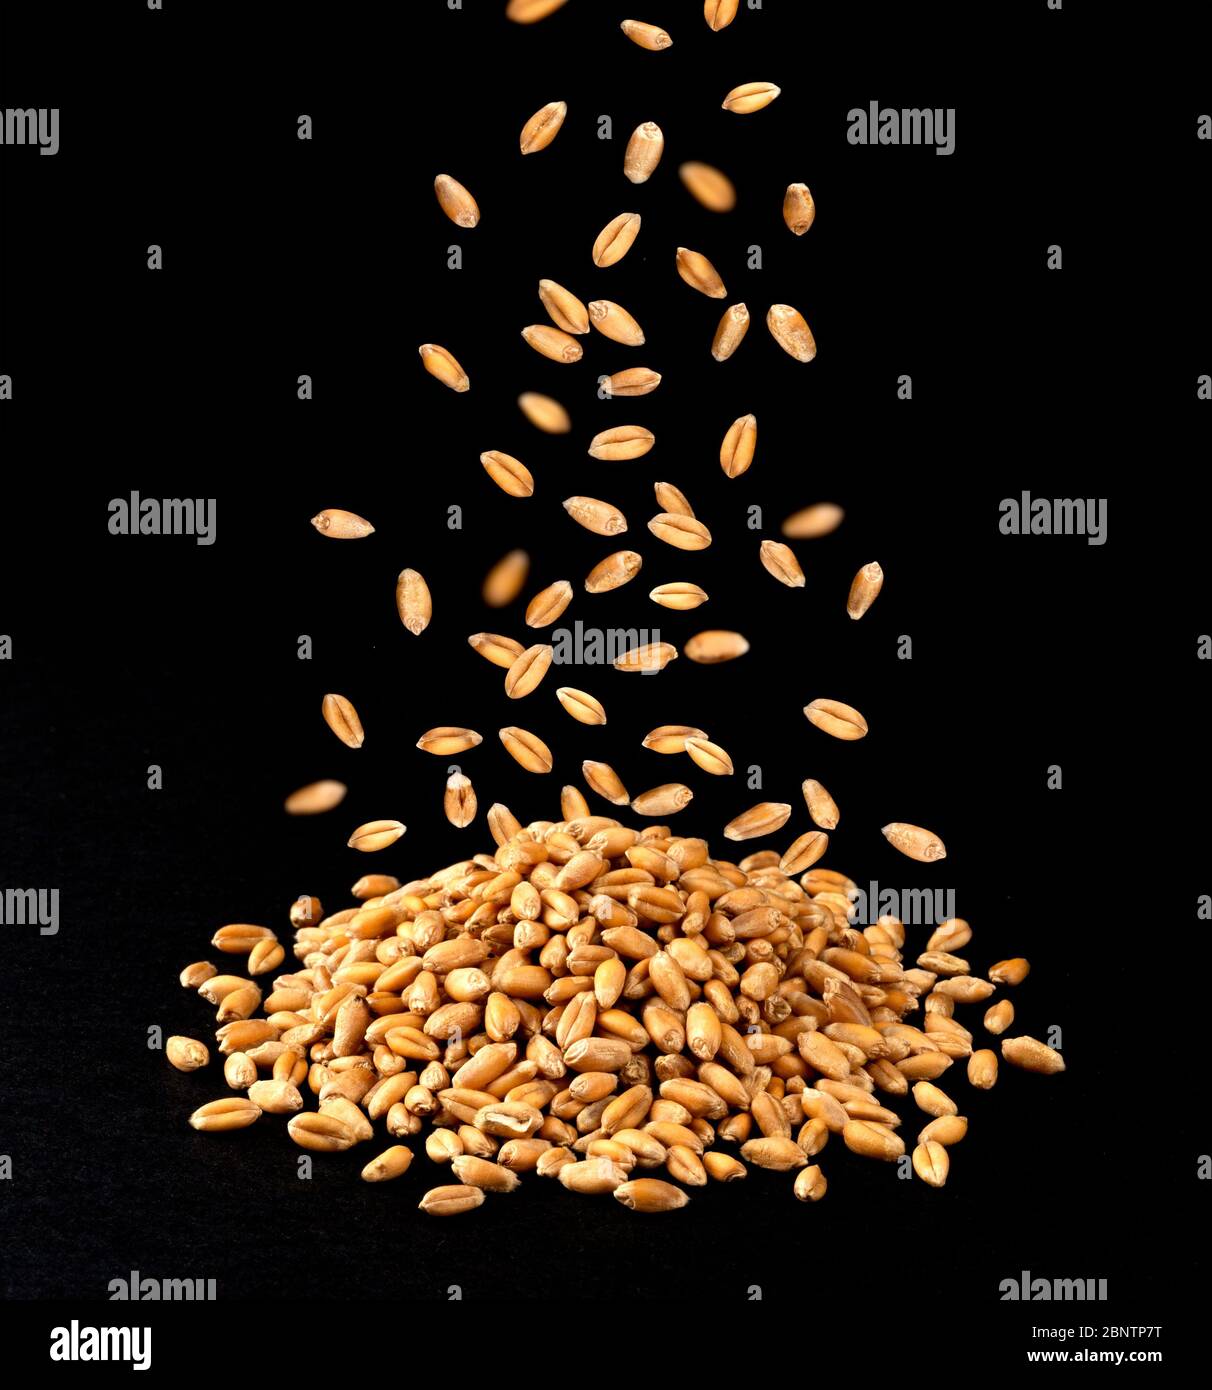 Falling dry wheat grains isolated on black background Stock Photo